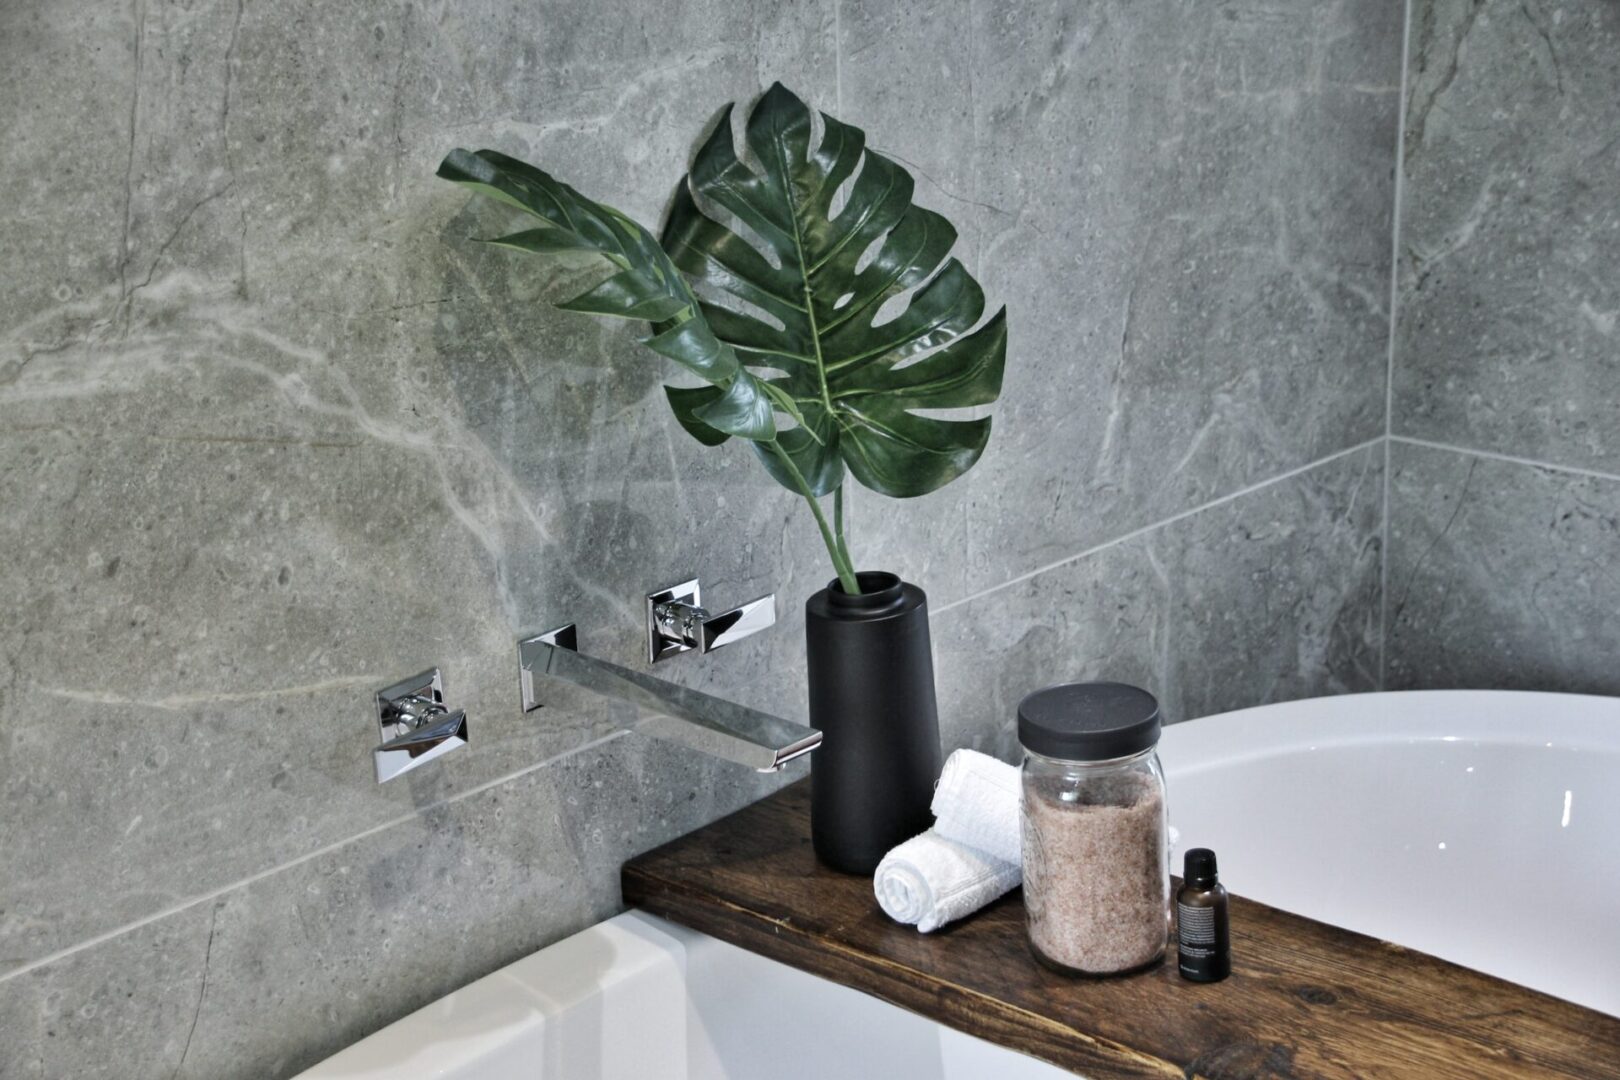 A bathroom with a plant in the corner of it